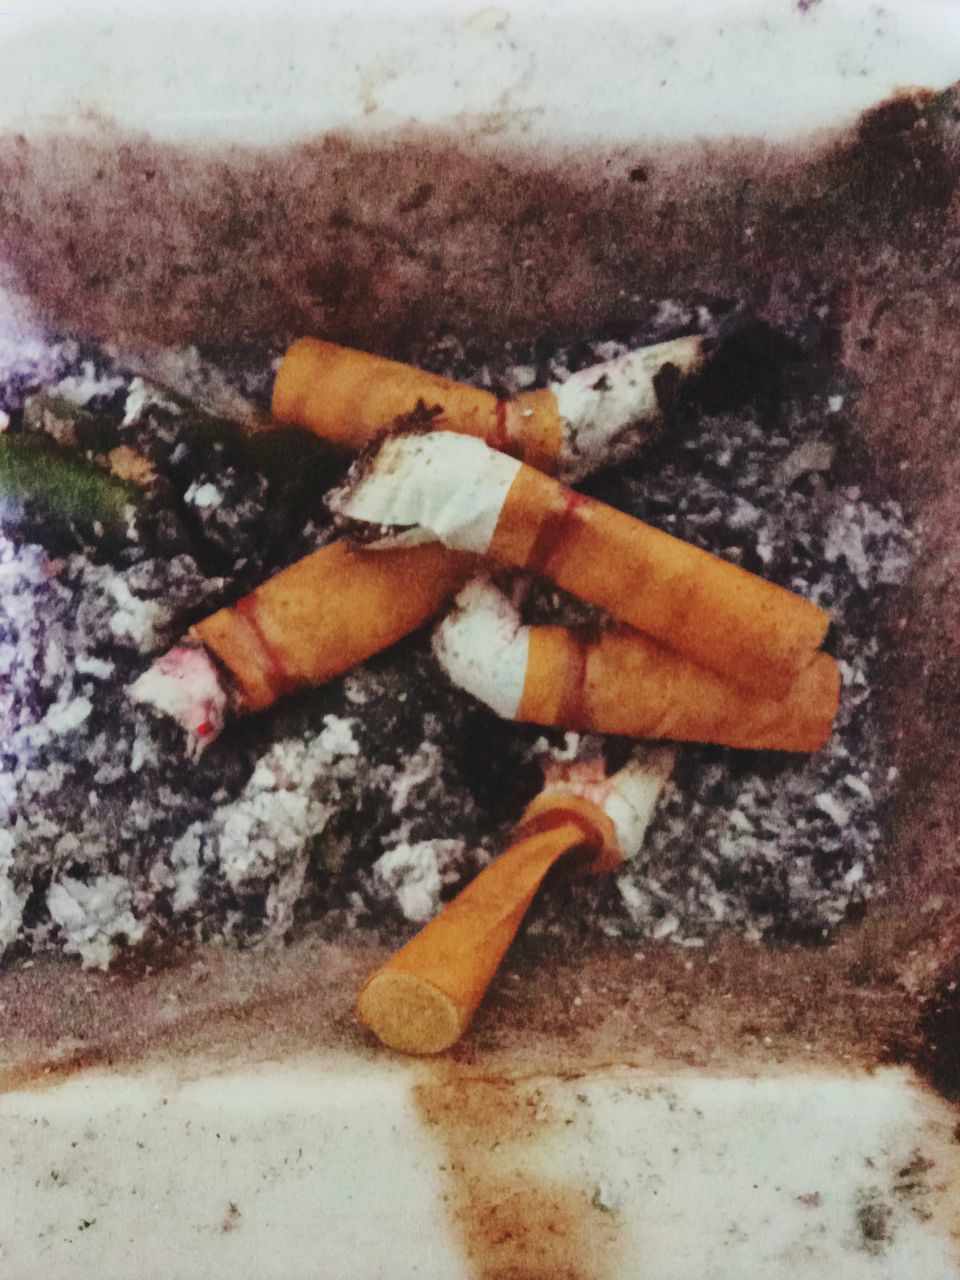 cigarette, cigarette butt, bad habit, smoking issues, tobacco products, warning sign, sign, ash, social issues, burnt, ashtray, risk, communication, smoking, no people, dessert, food, smoke, close-up, careless, high angle view